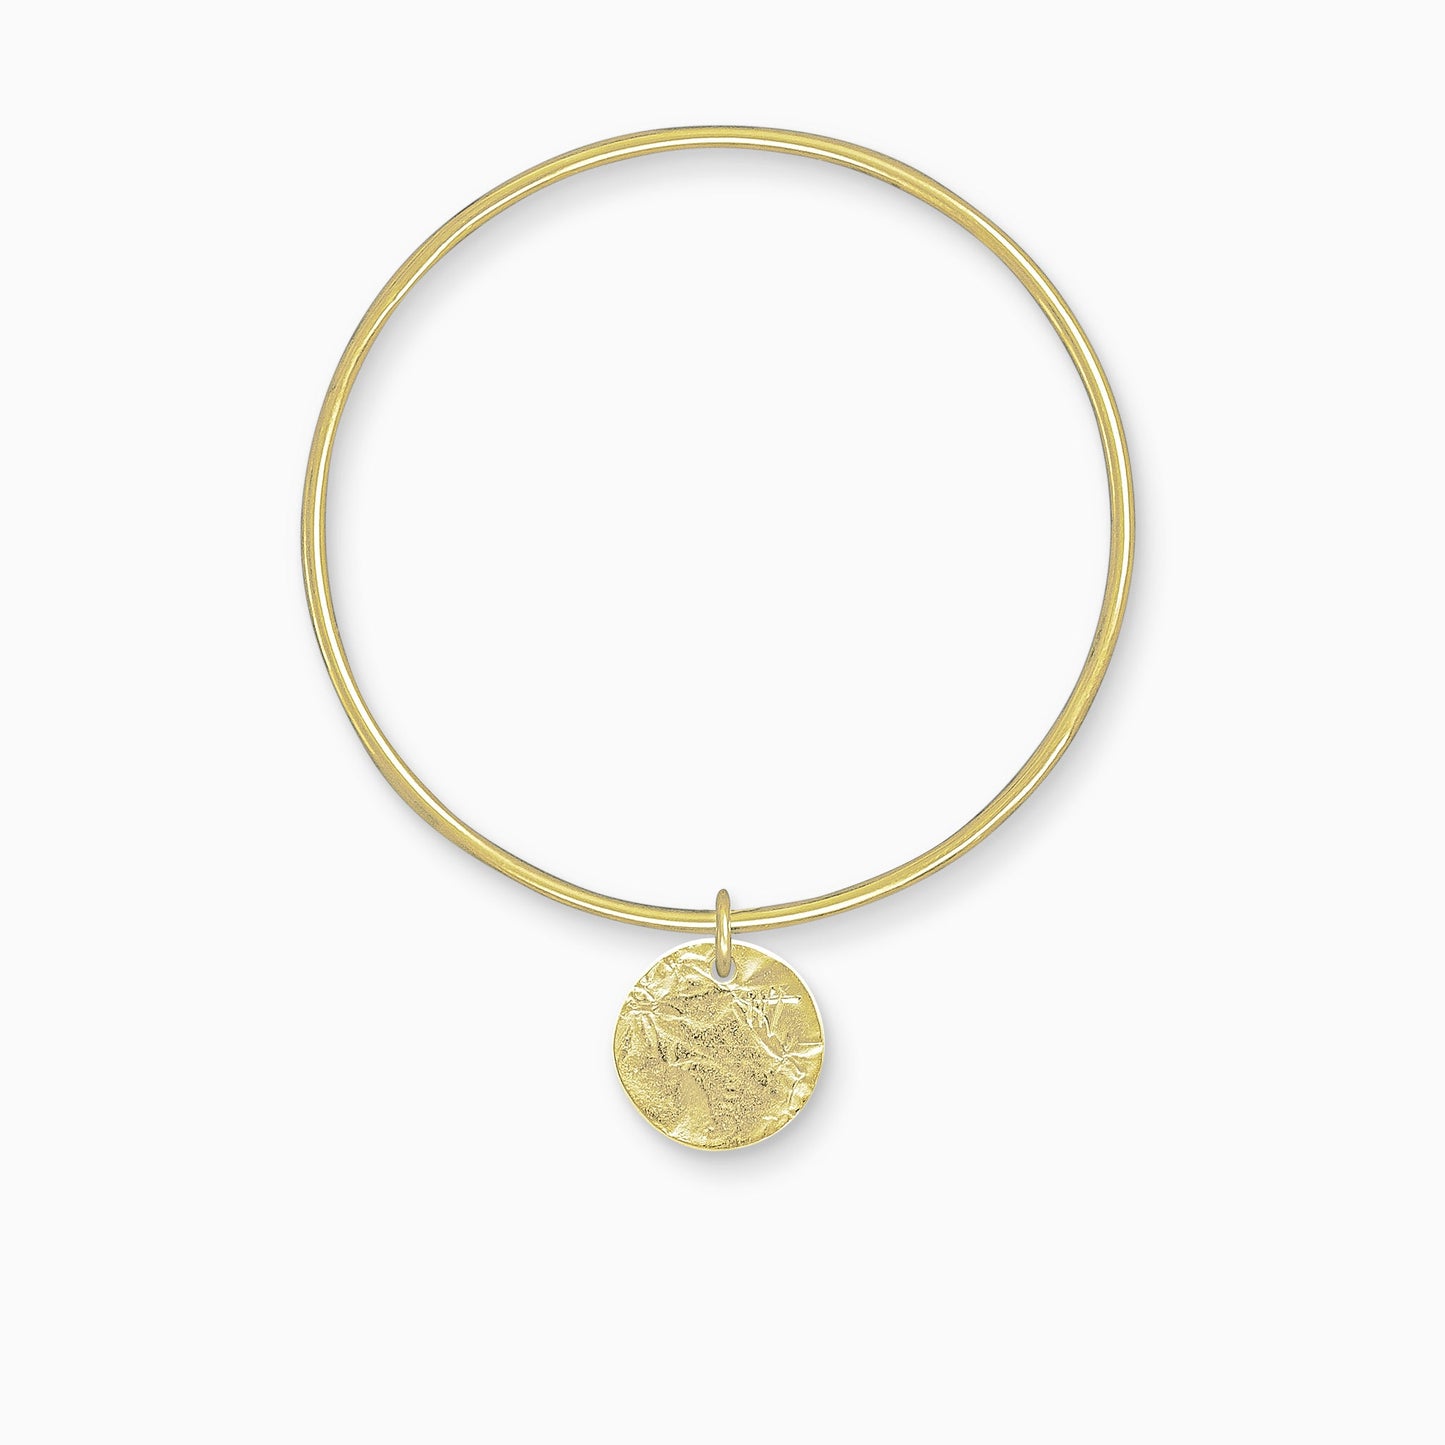 An 18ct Fairtrade yellow gold textured, circular, flat disc charm freely moving on a round wire bangle. Charm 17mm. Bangle 63mm inside diameter x 2mm round wire.